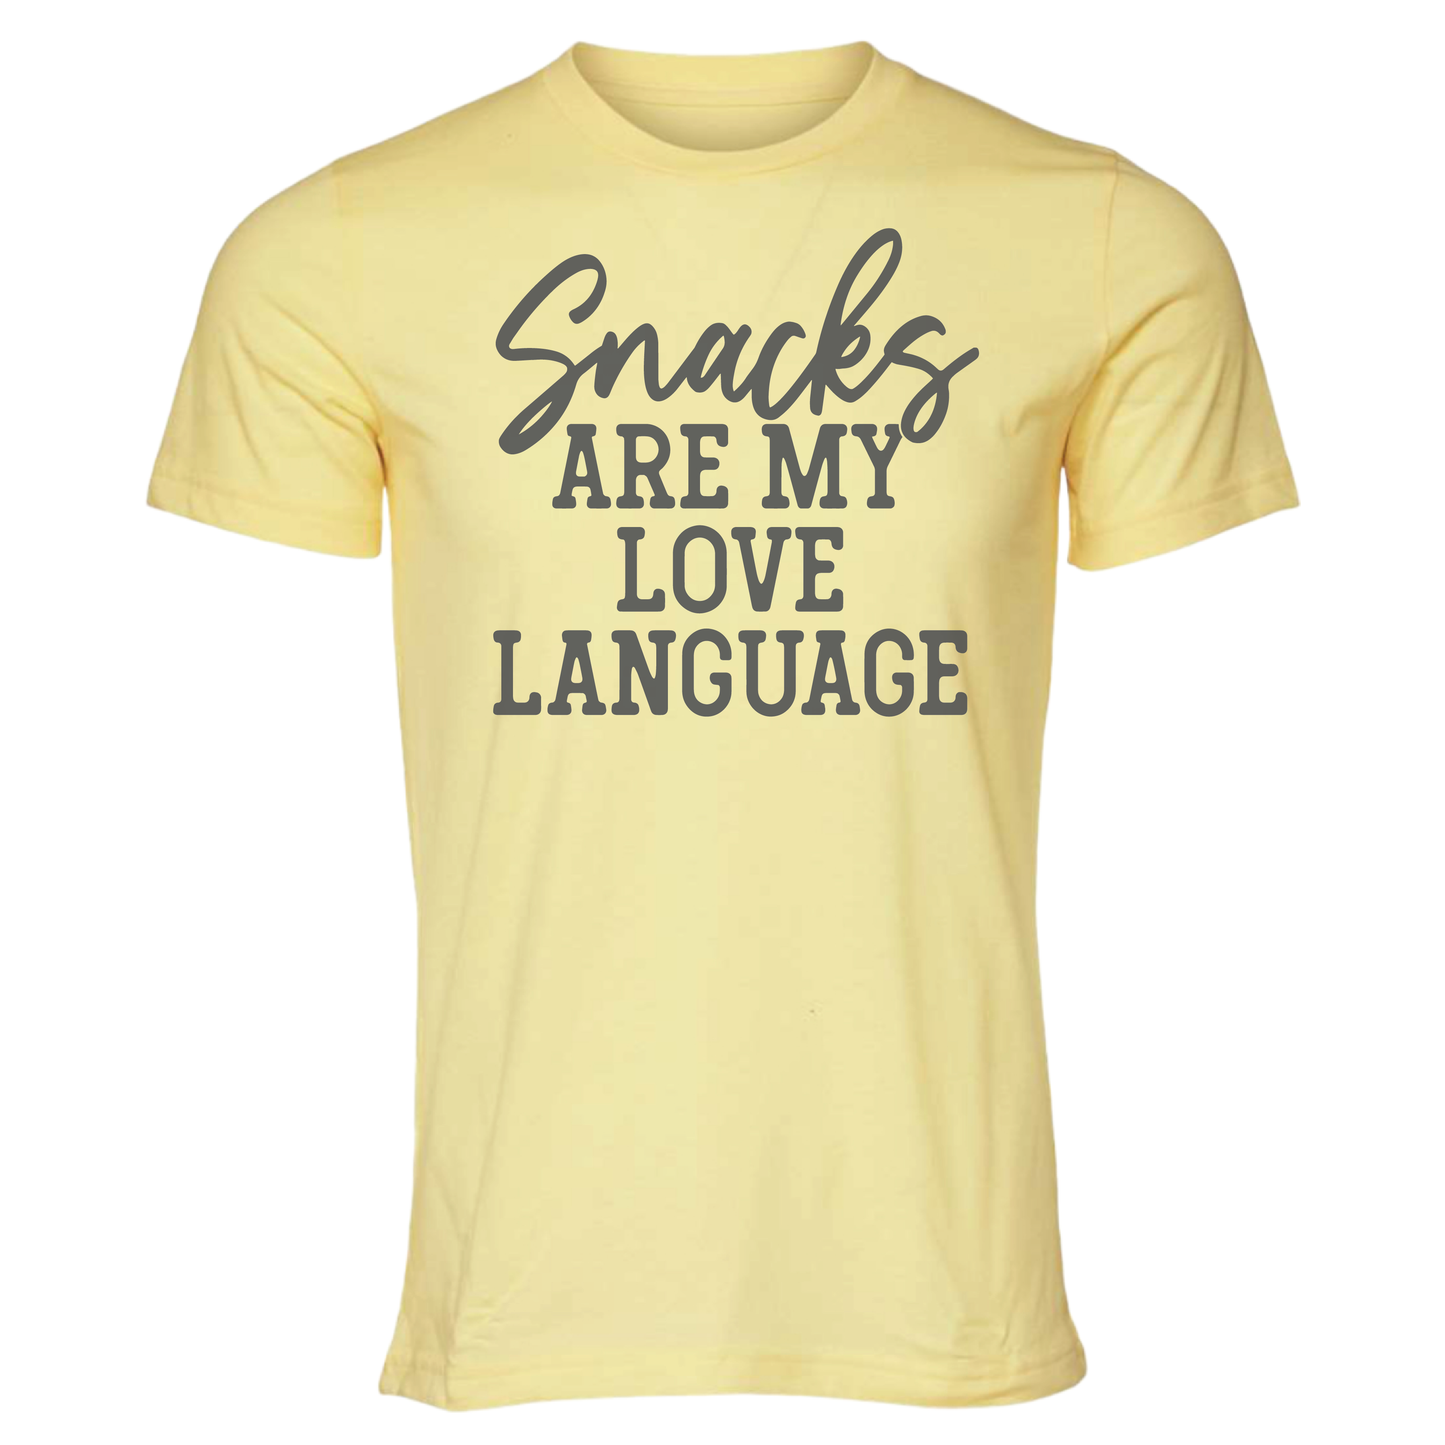 Snacks - Shirt, Tank Top, Long Sleeve or Hoodie - Available in Multiple Colors